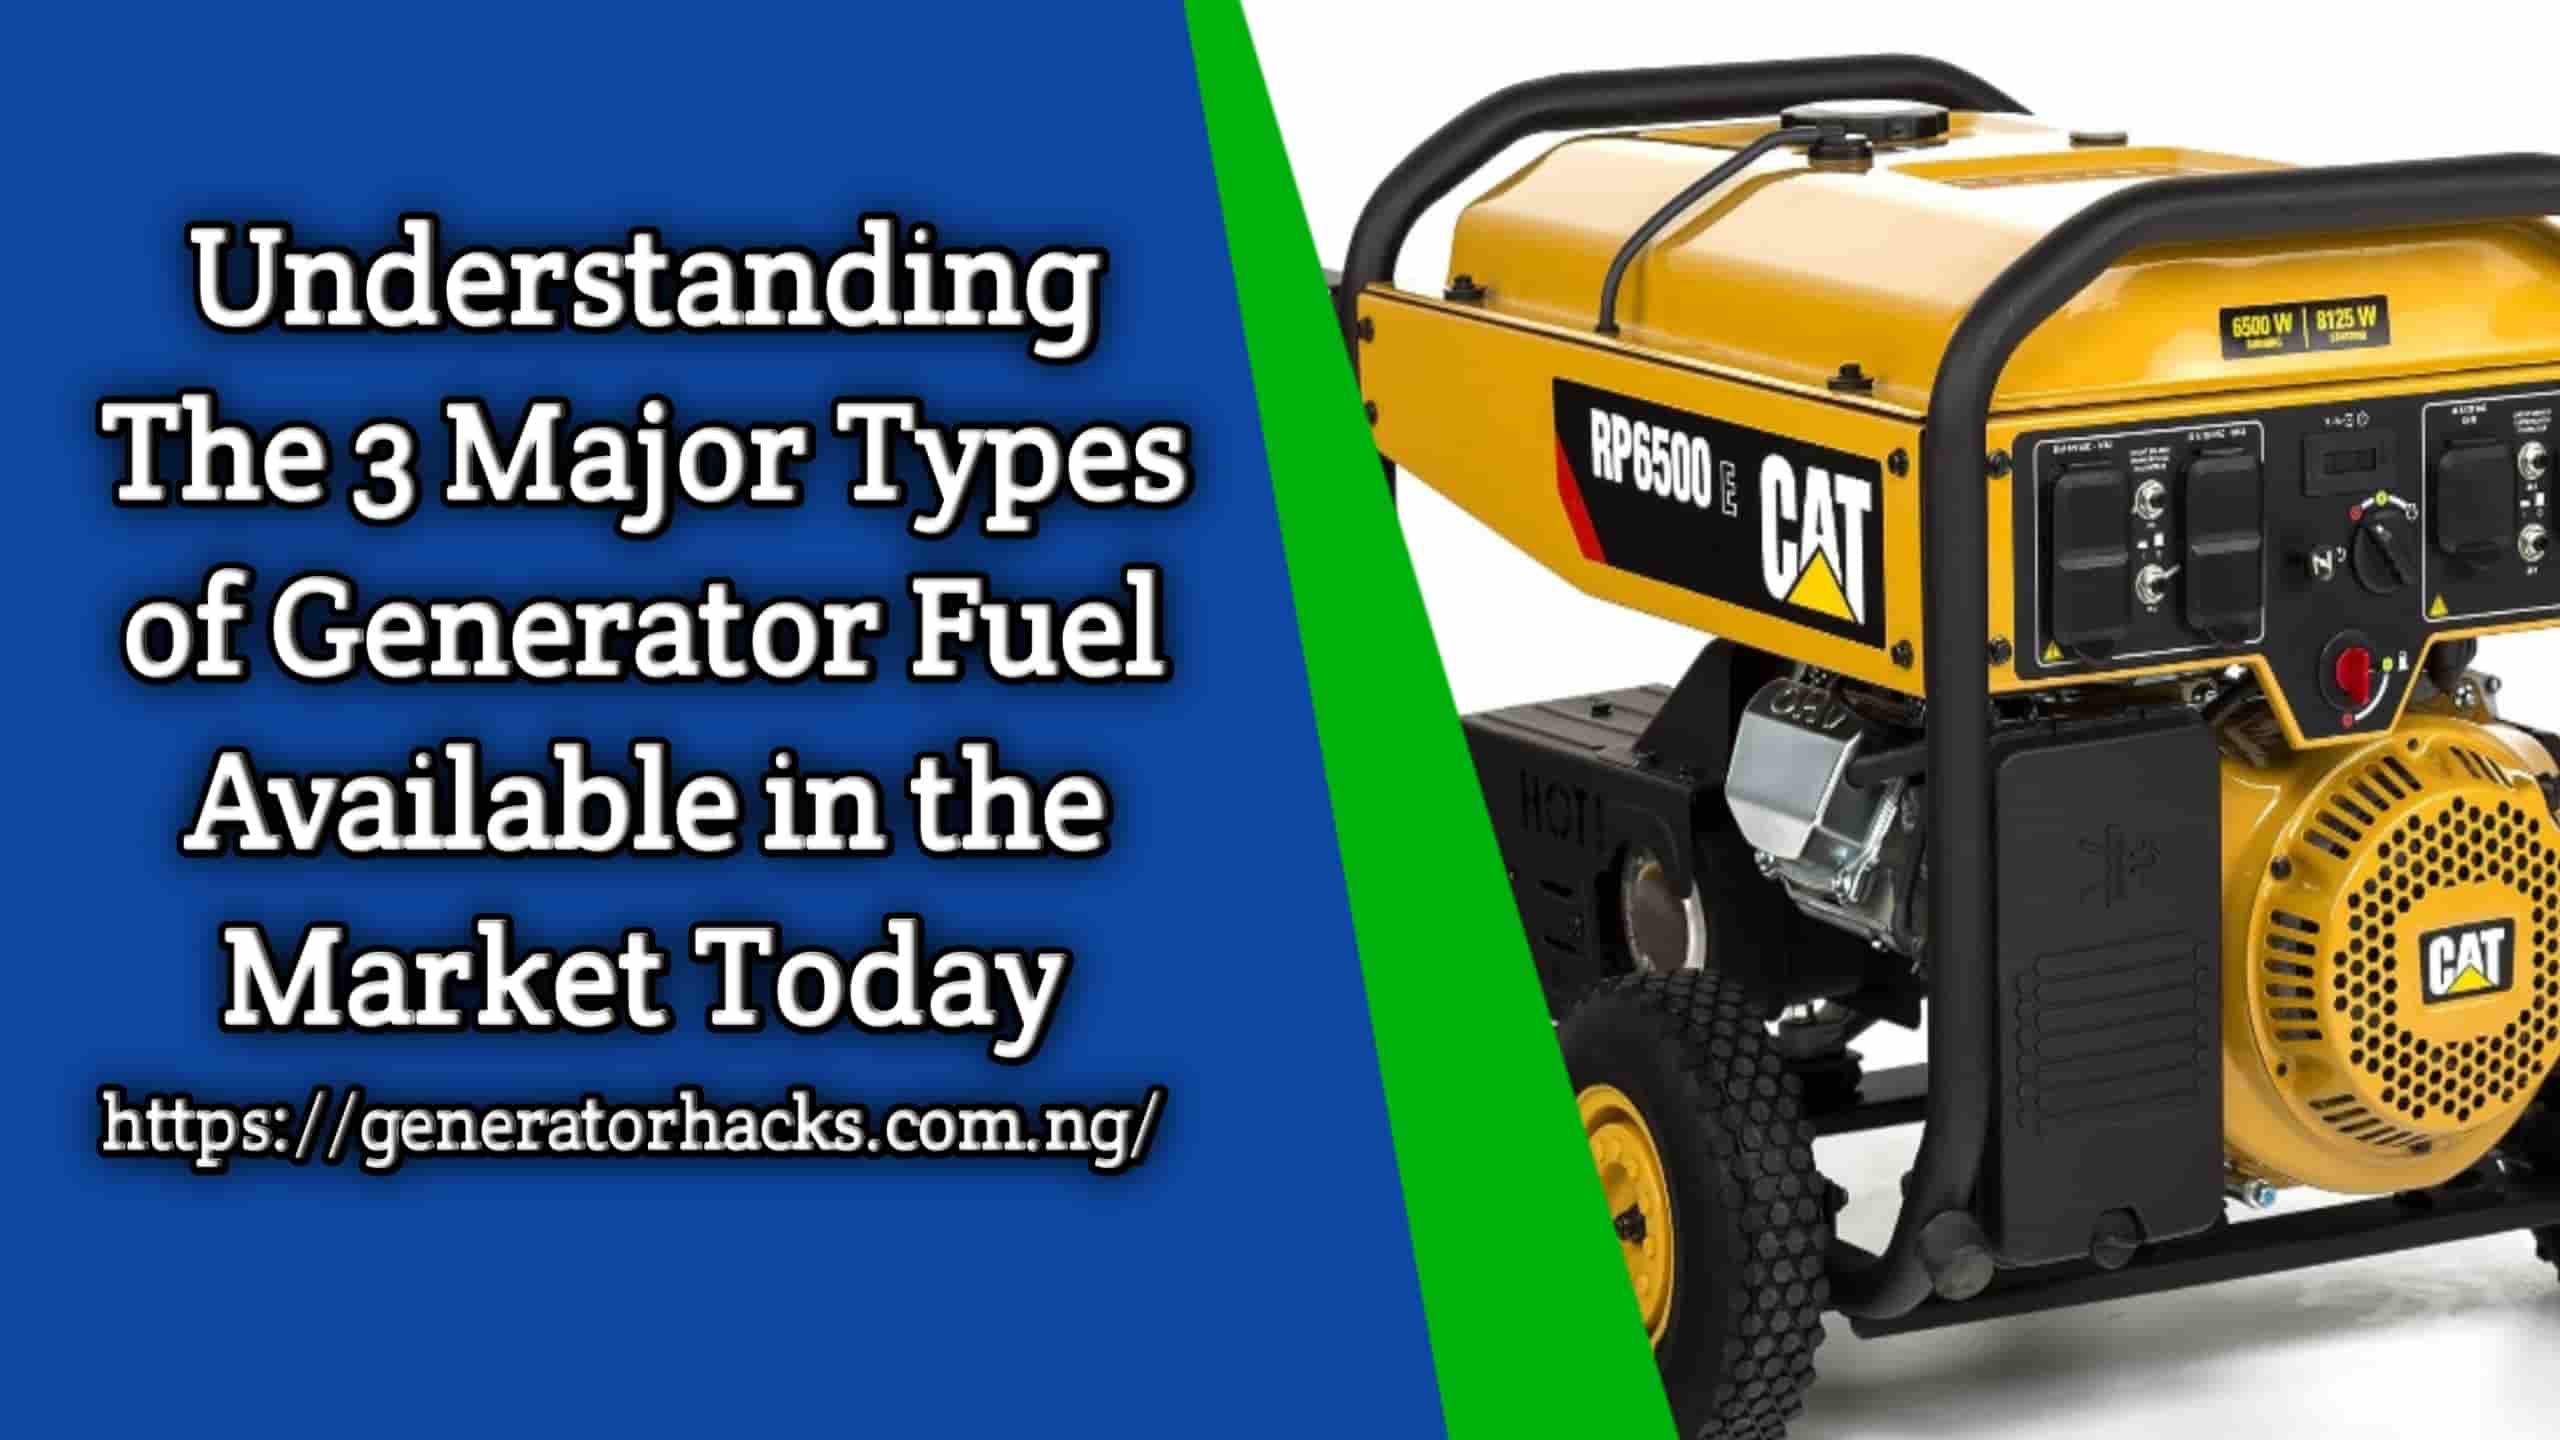 Understanding The 3 Major Types of Generator Fuel Available in the Market Today